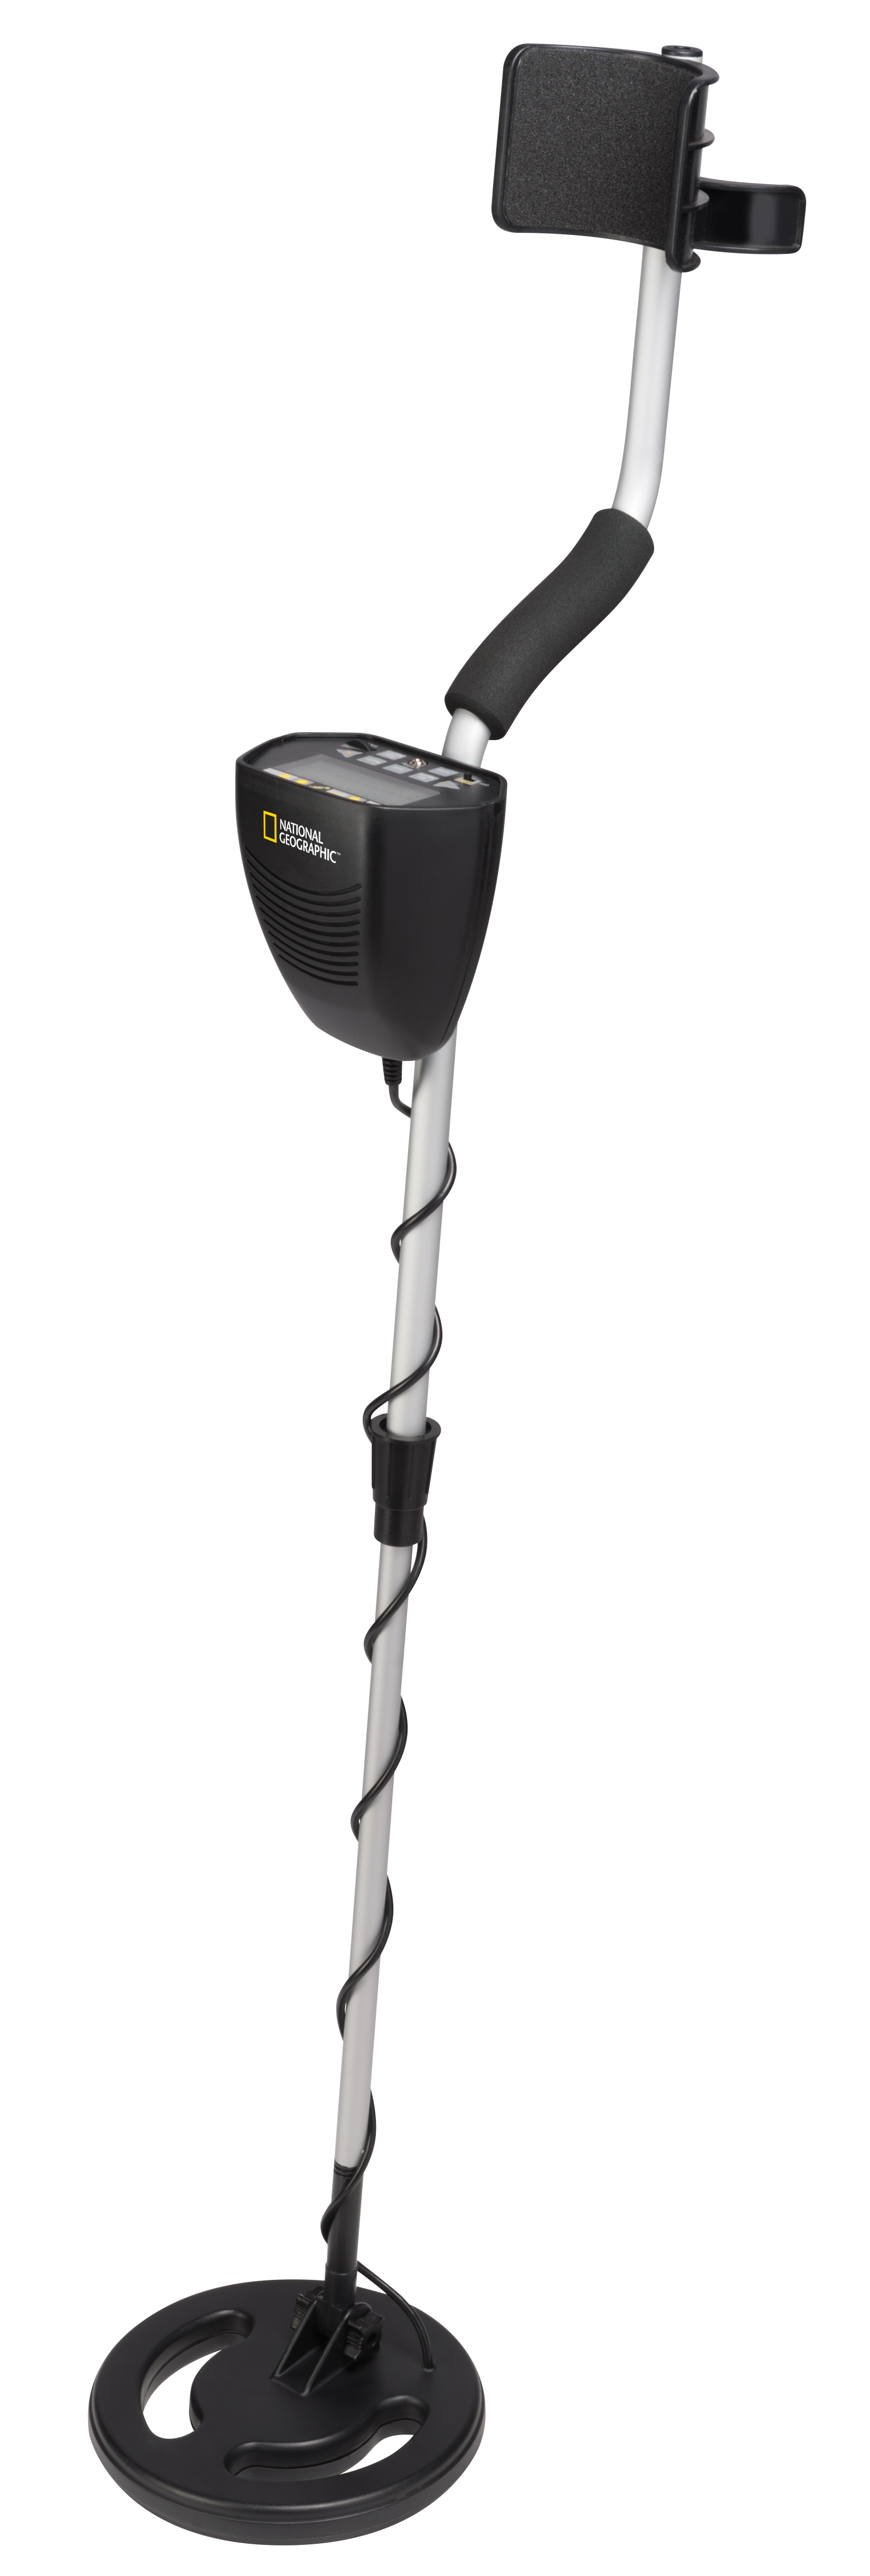 NATIONAL GEOGRAPHIC Metal detector with metal type detection and depth indicator